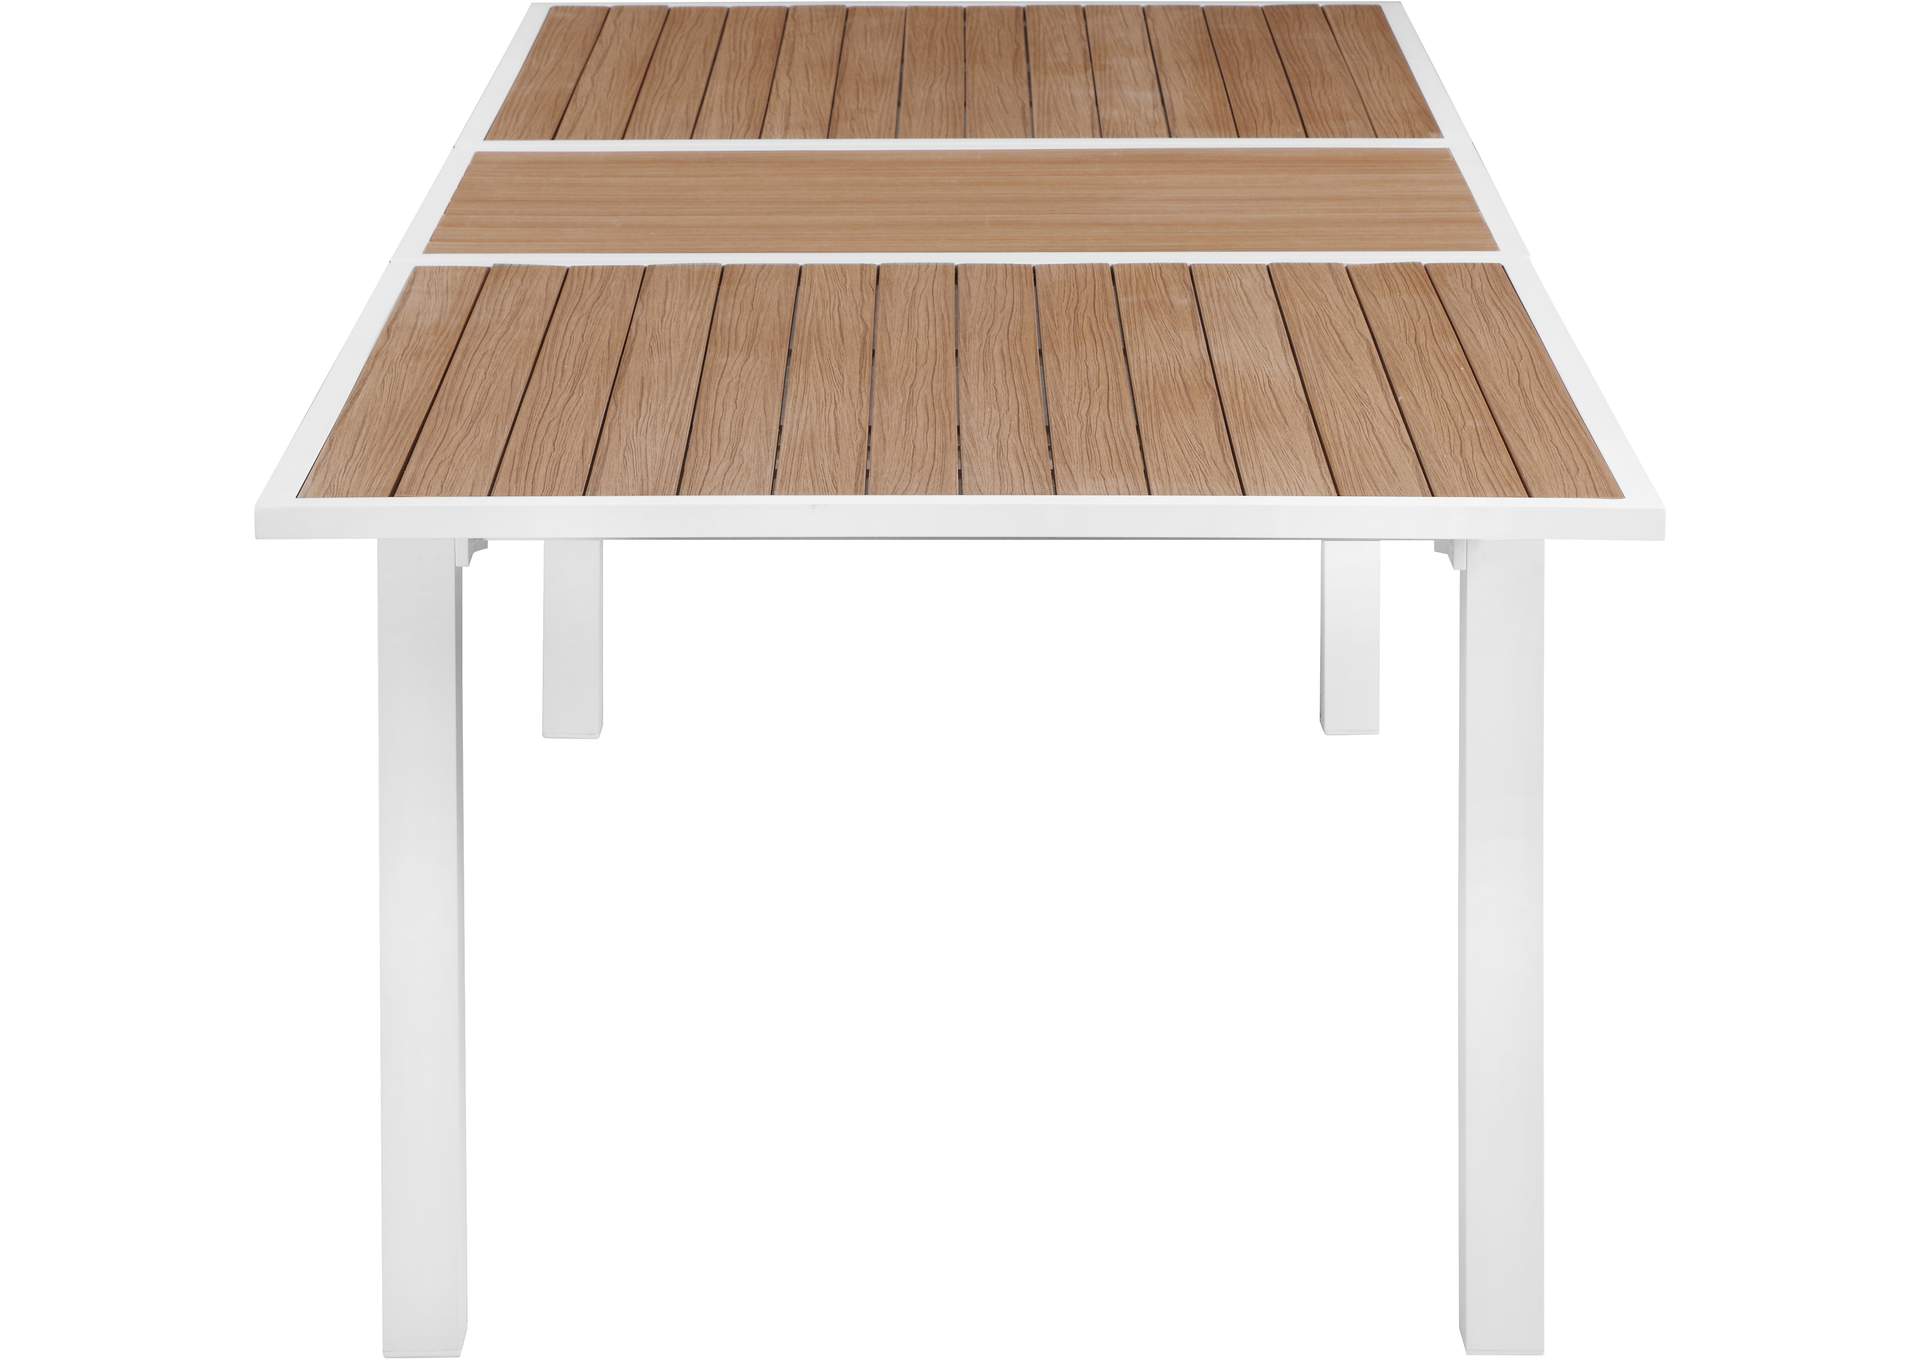 Nizuc Brown Wood Look Accent Paneling Outdoor Patio Extendable Aluminum Dining Table,Meridian Furniture